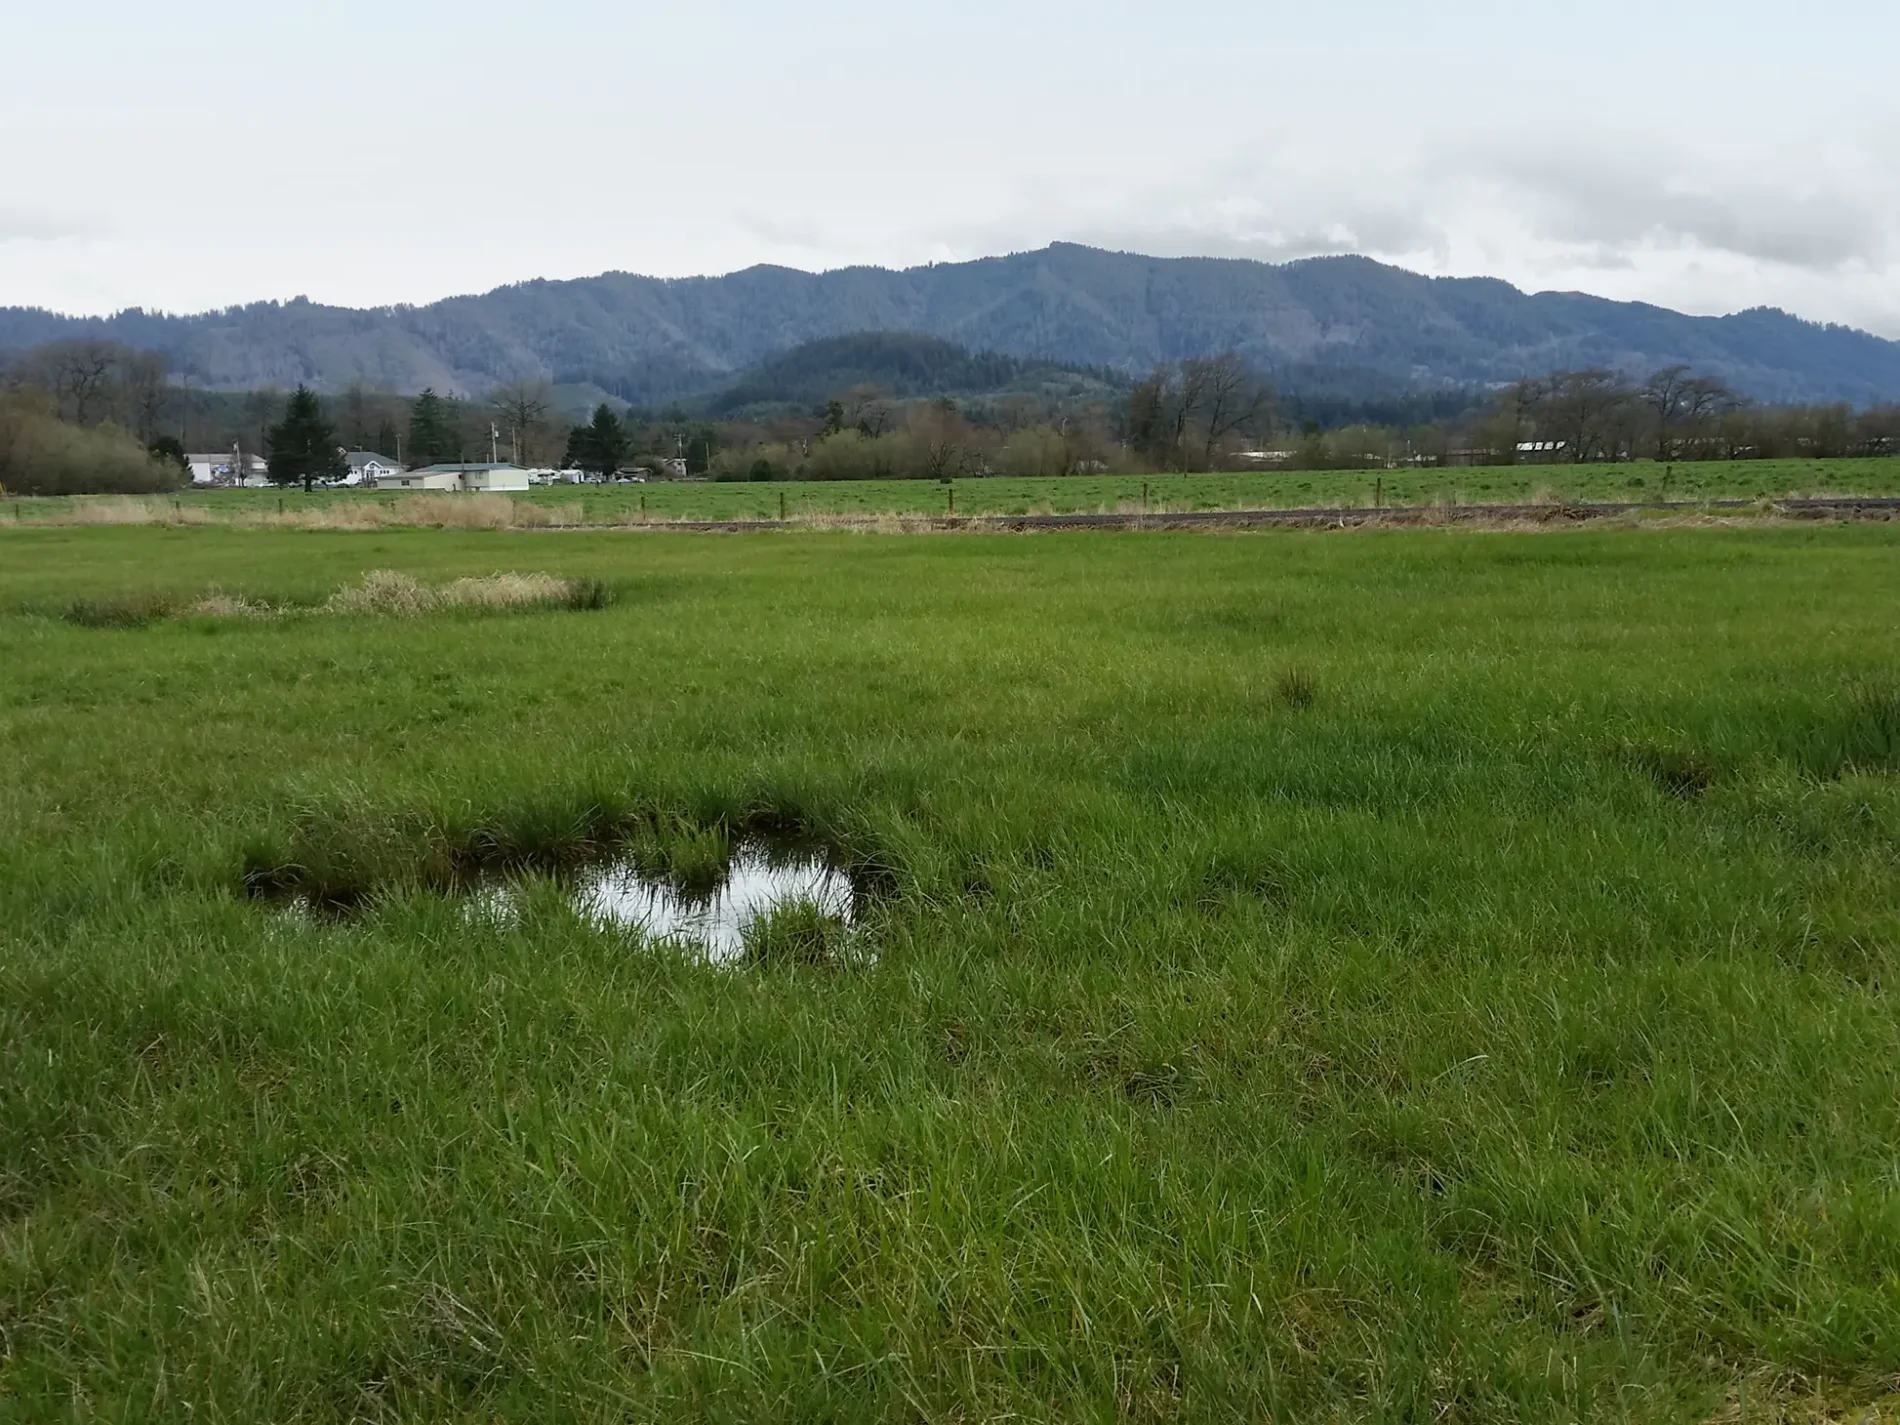 Wetlands and mountains at a site where Apex provided Comprehensive Environmental and Natural Resource Site Development Support